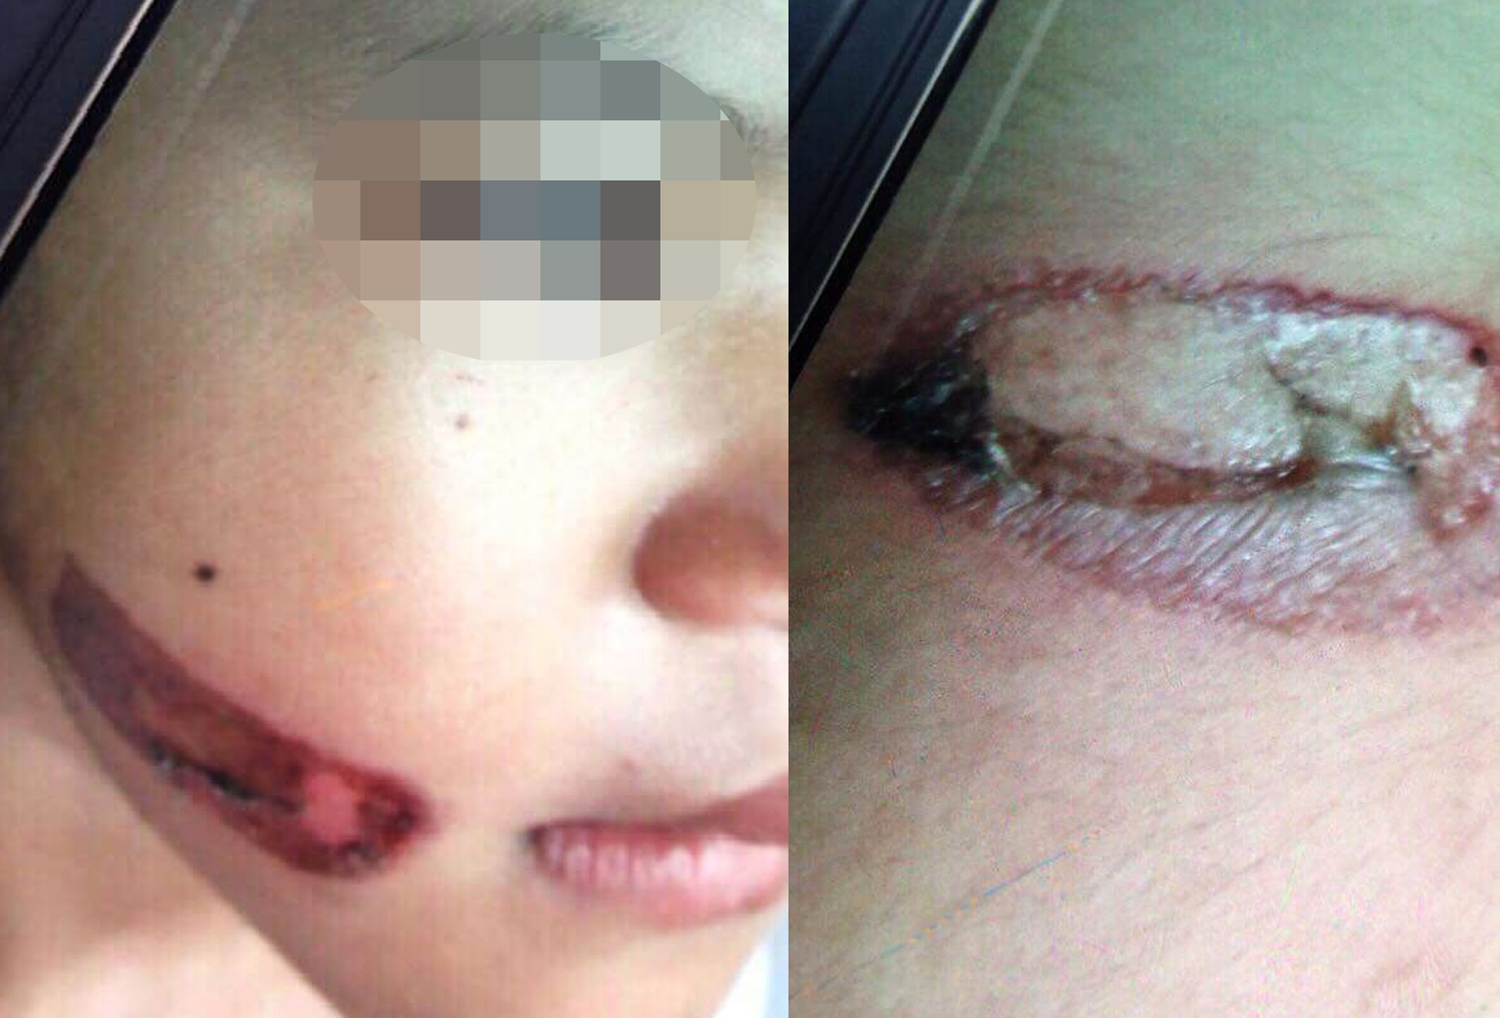 ​7-yr-old Vietnamese girl tortured with heated iron by father, stepmother